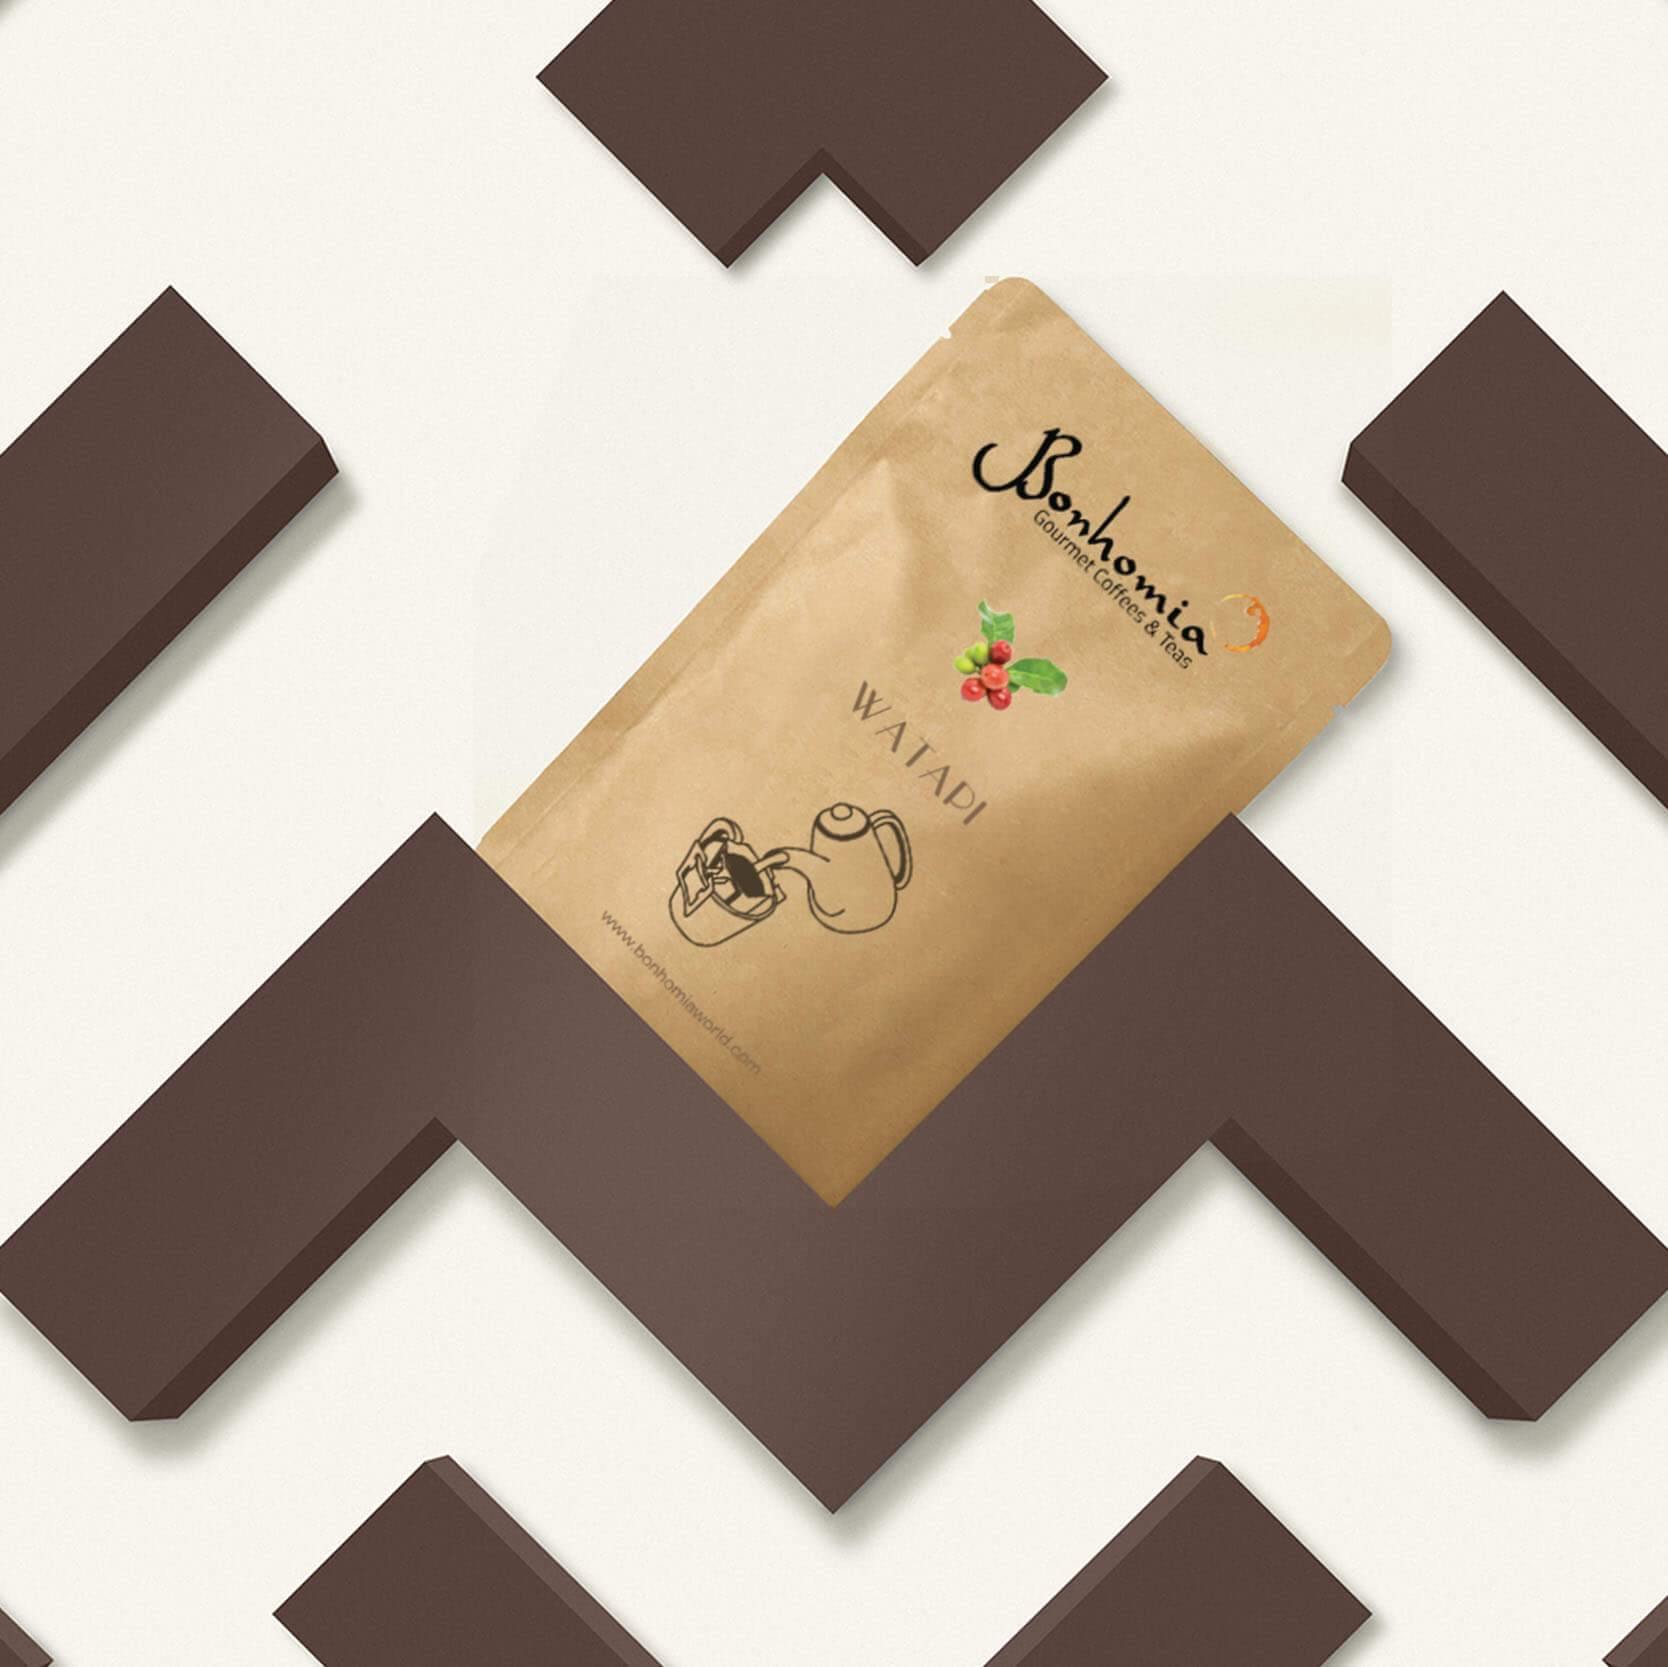 Watapi | Mild spicy Coffee Drip Bags | Pack of 10 Easy pour coffee brew bags